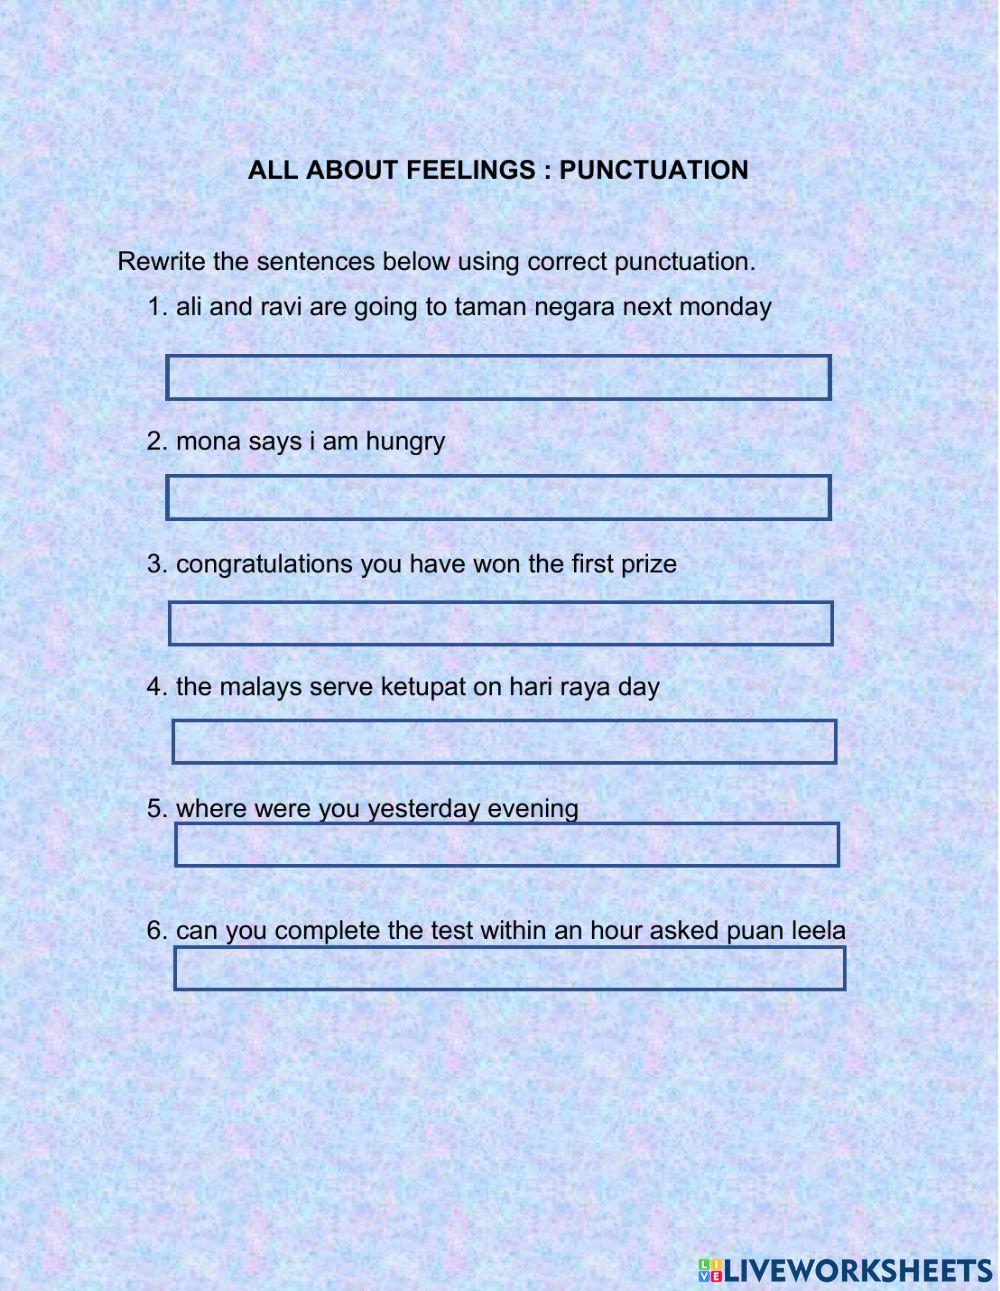 UNIT 1: ALL ABOUT FEELINGS(PUNCTUATION)